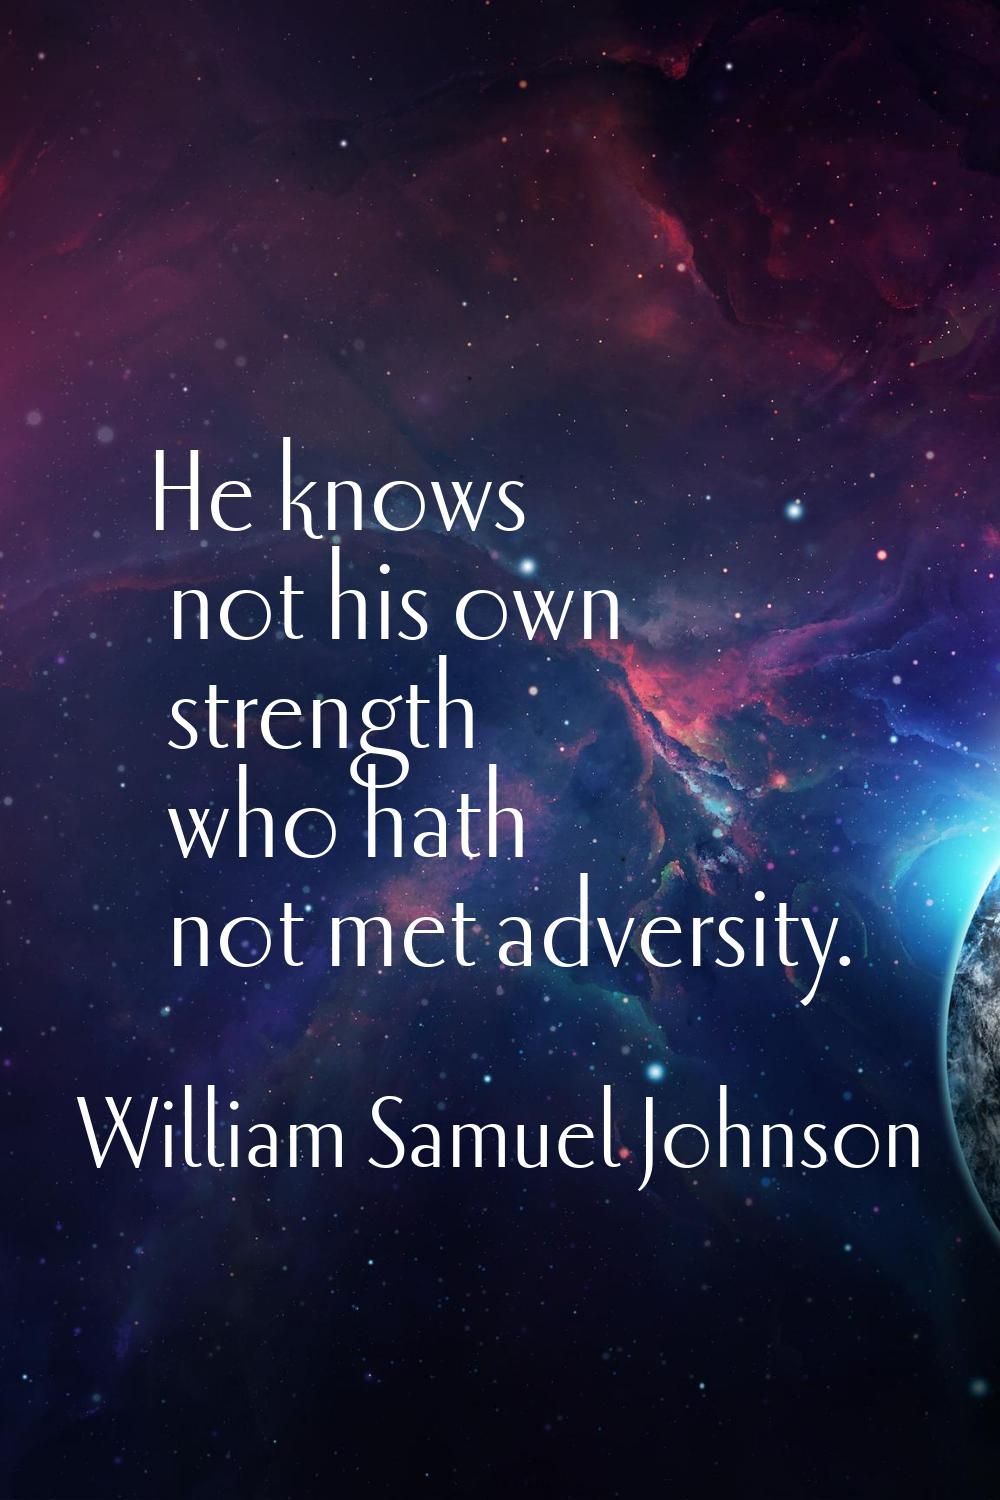 He knows not his own strength who hath not met adversity.